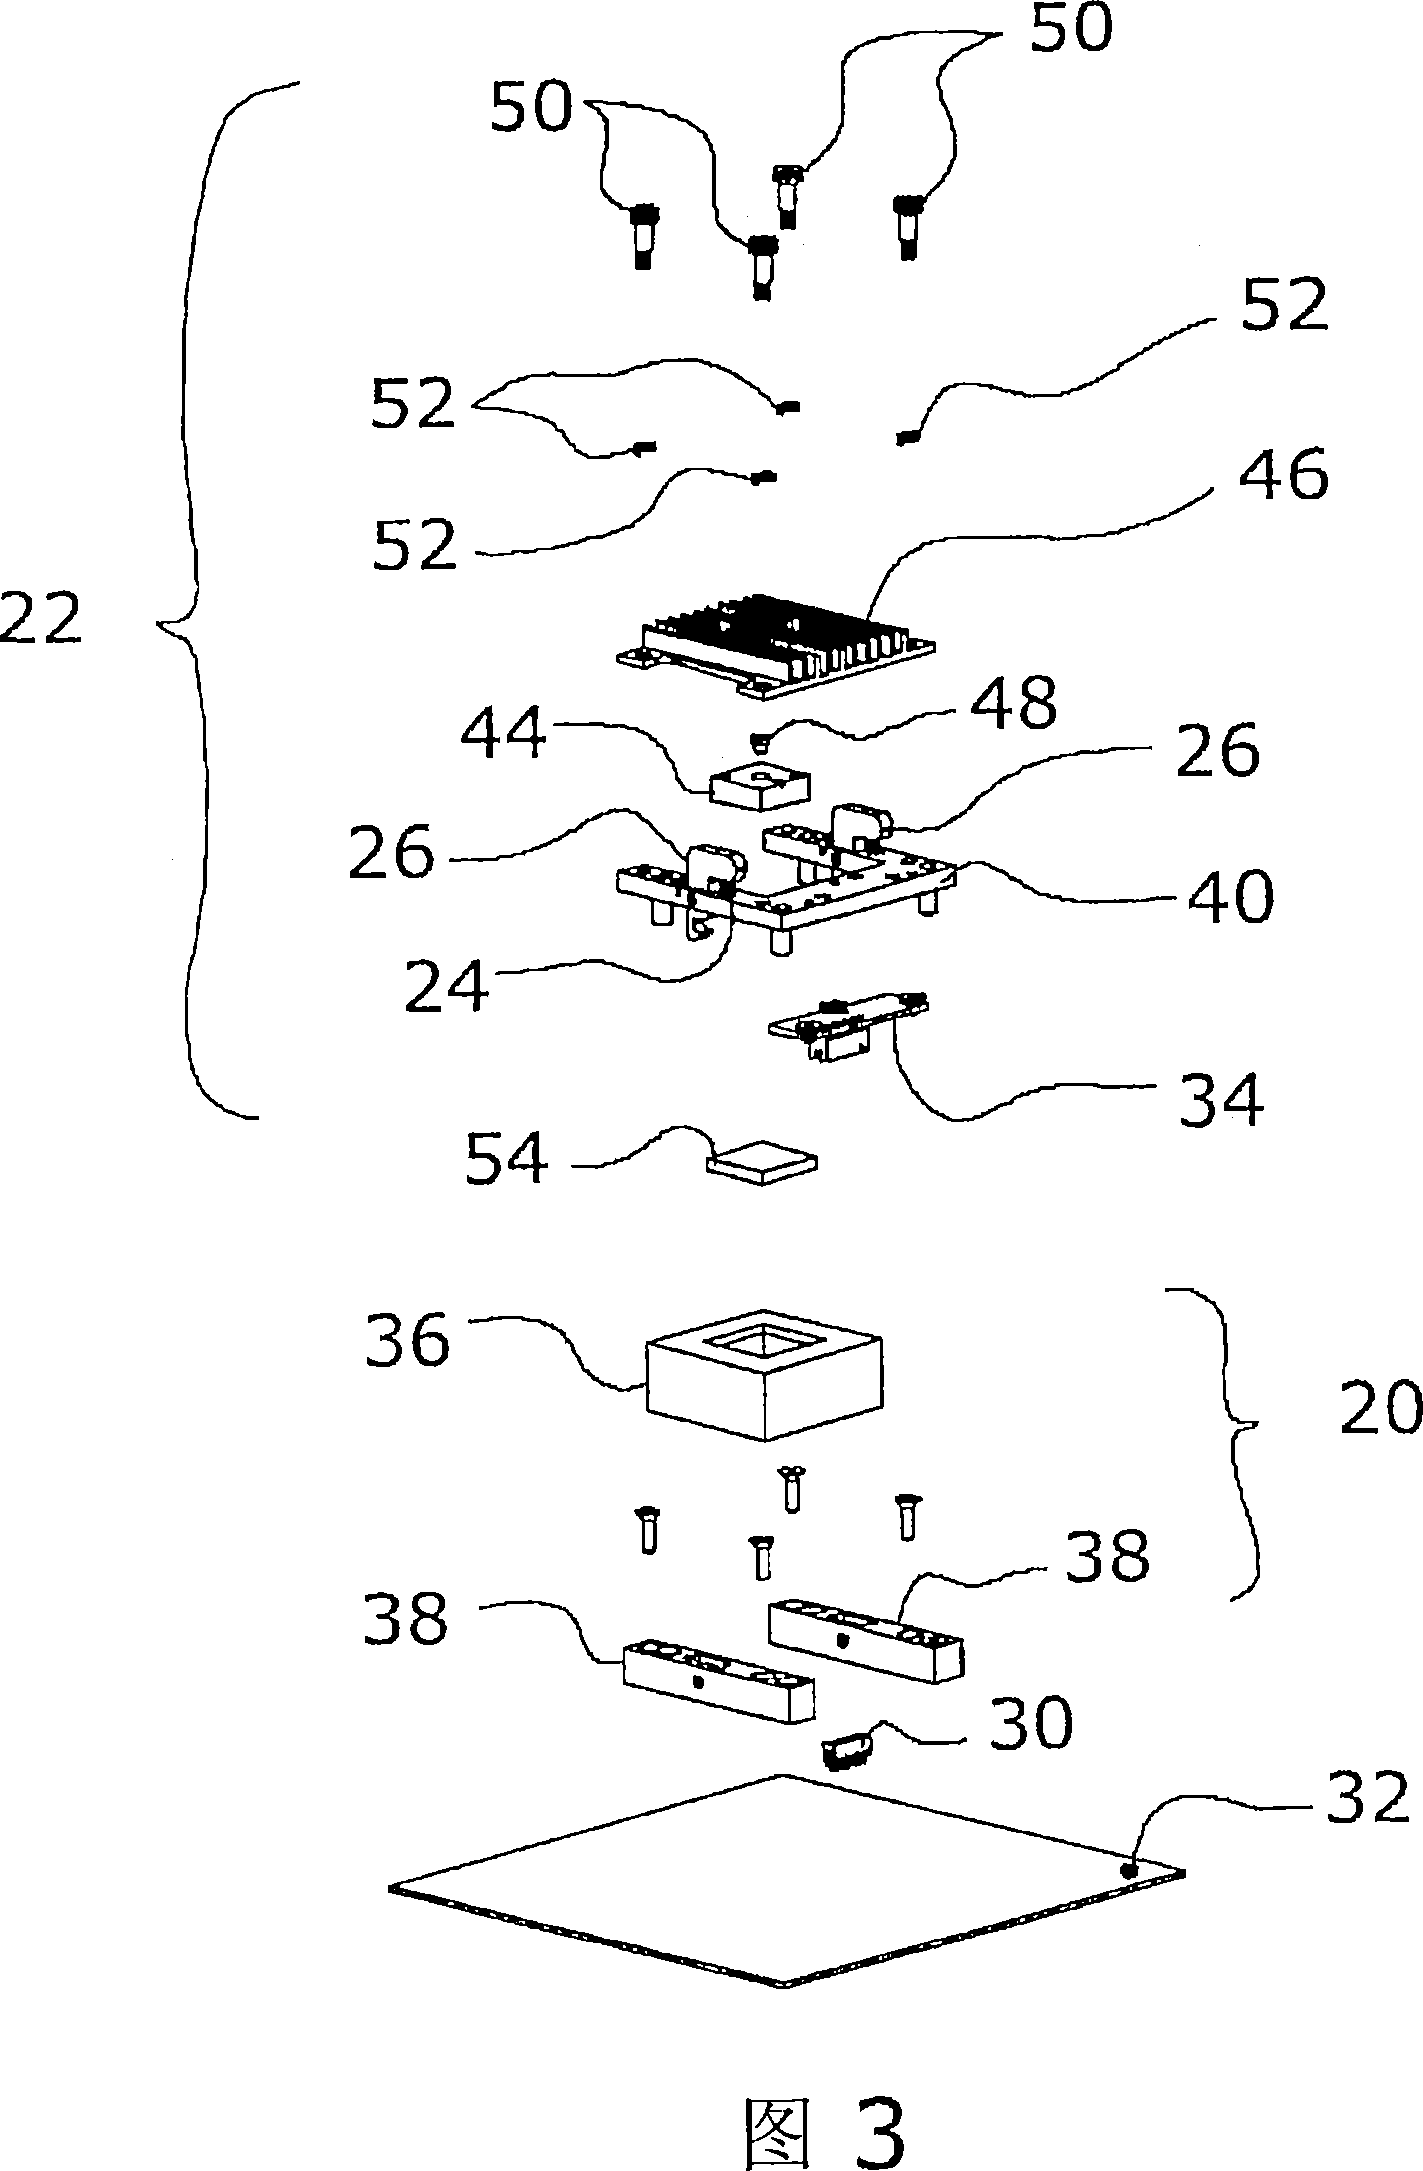 Aging testing apparatus and method